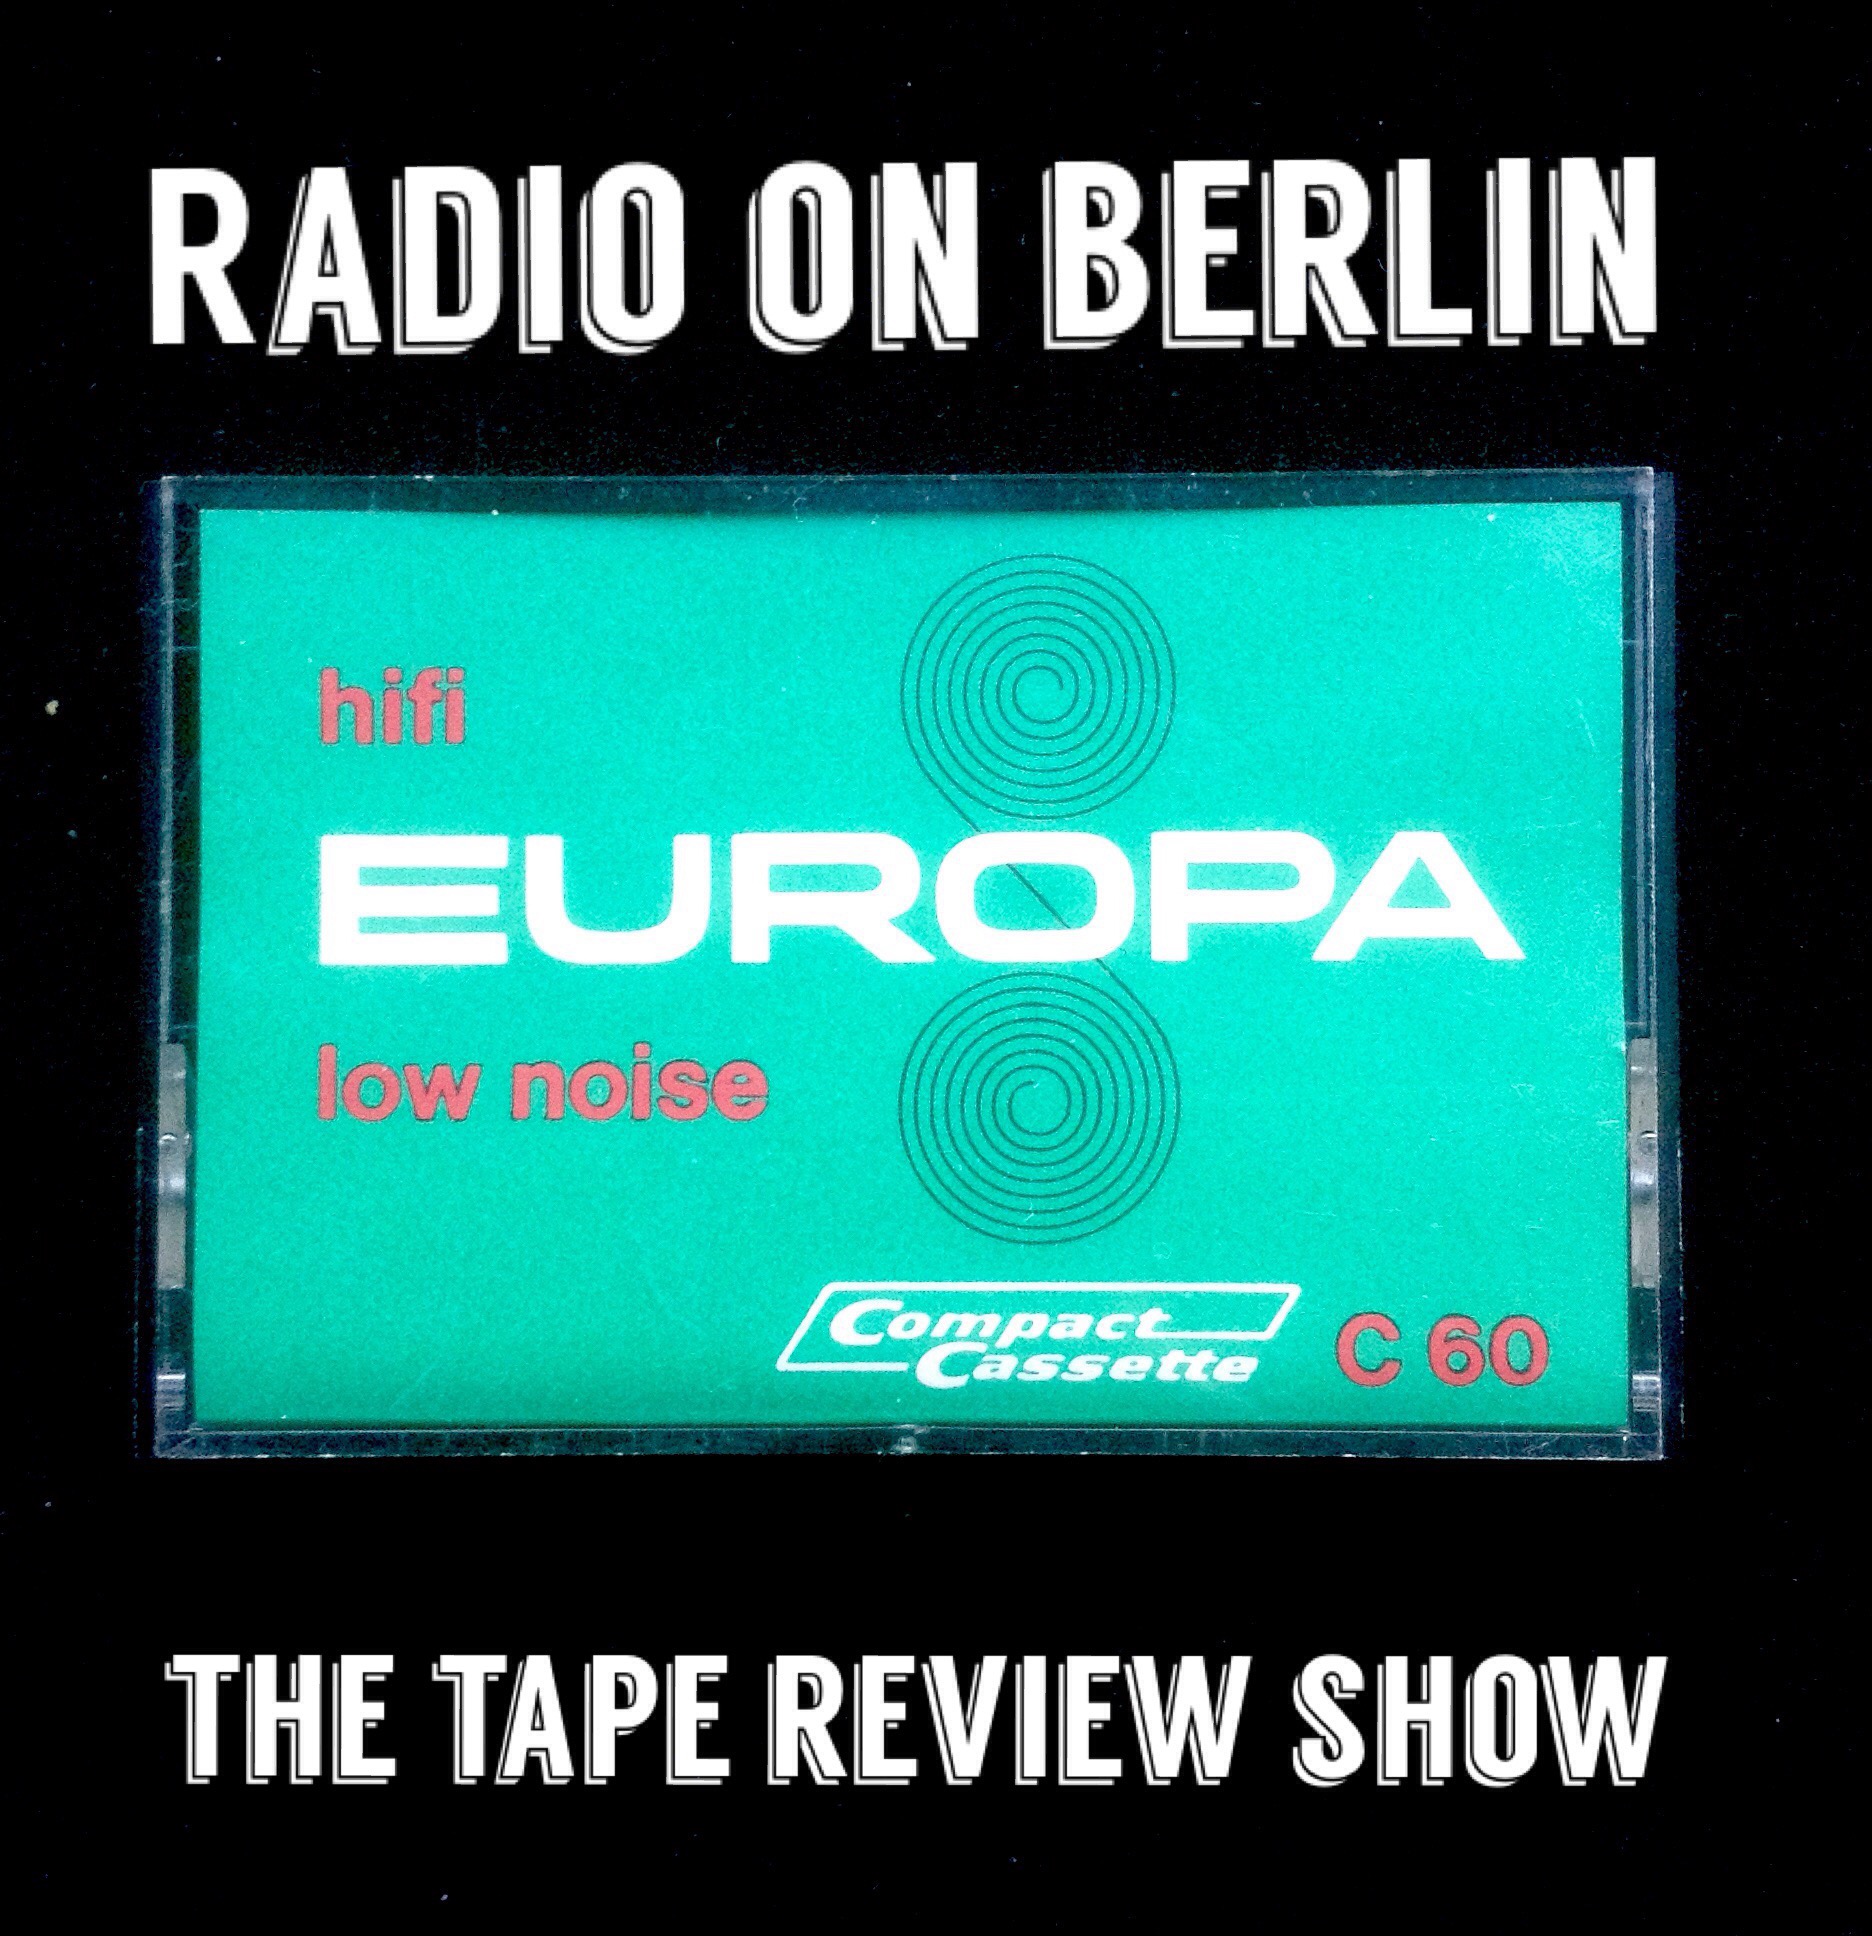 The Tape Review Show: Alexander Luchkin, Mark Vernon, Earl Long